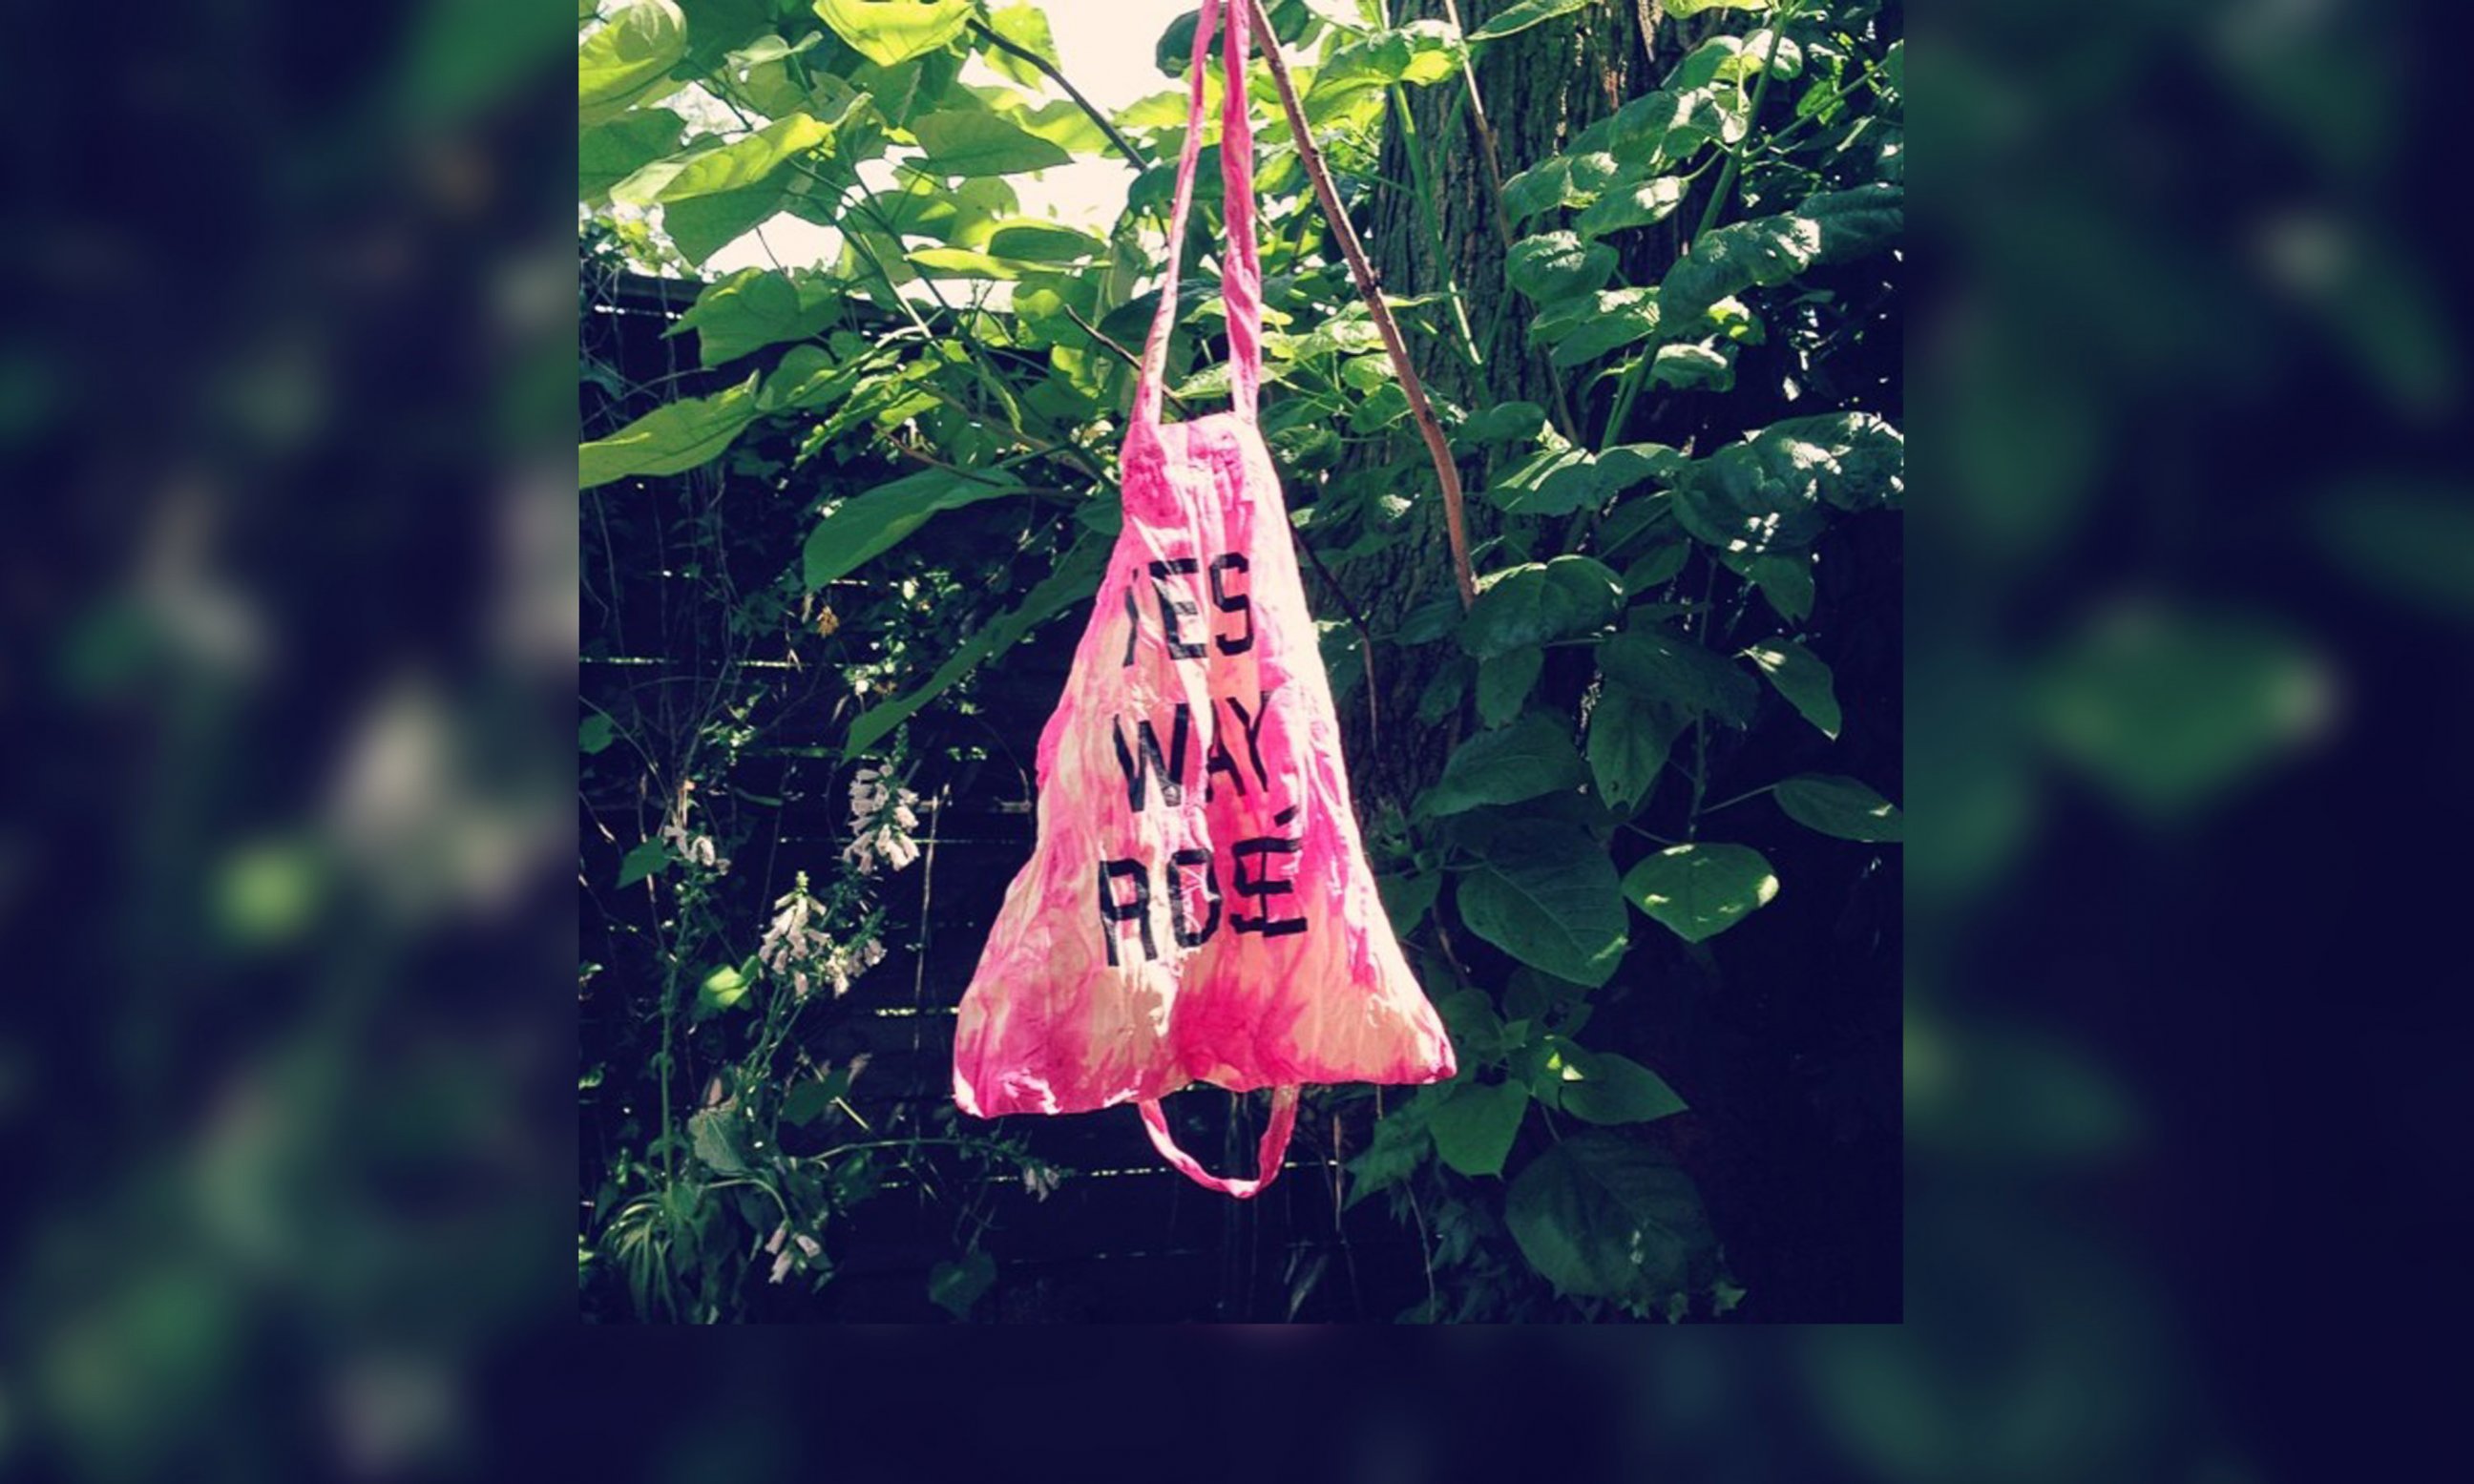 PHOTO: A Yes Way, Rosé tie-dyed tote bag.